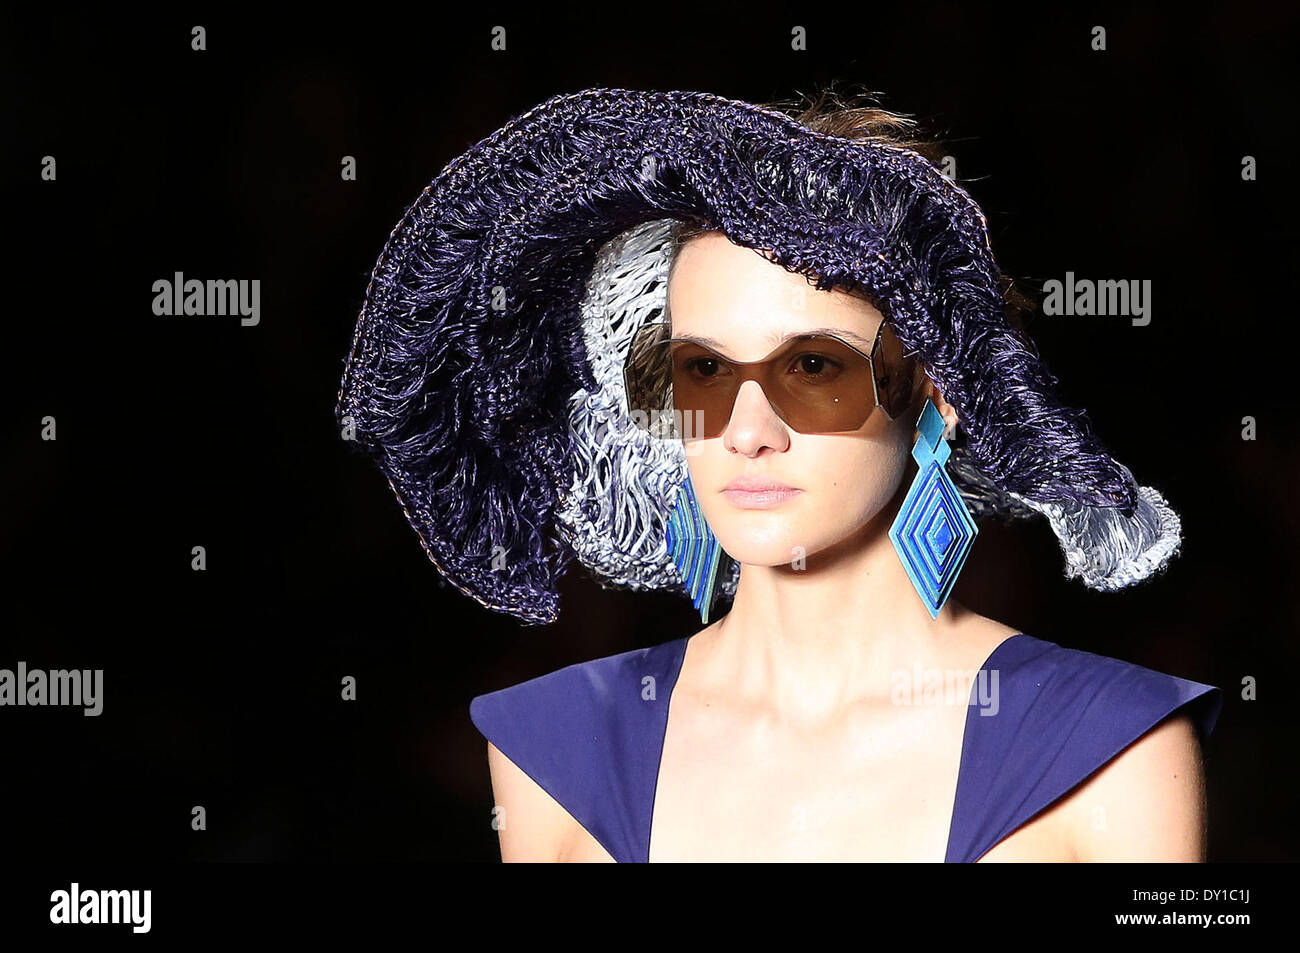 Sao Paulo, Brazil. 2nd Apr, 2014. A model presents a creation from Ronaldo Fraga's summer collection during the Sao Paulo Fashion Week in Sao Paulo, Brazil, on April 2, 2014. © Rahel Patrasso/Xinhua/Alamy Live News Stock Photo